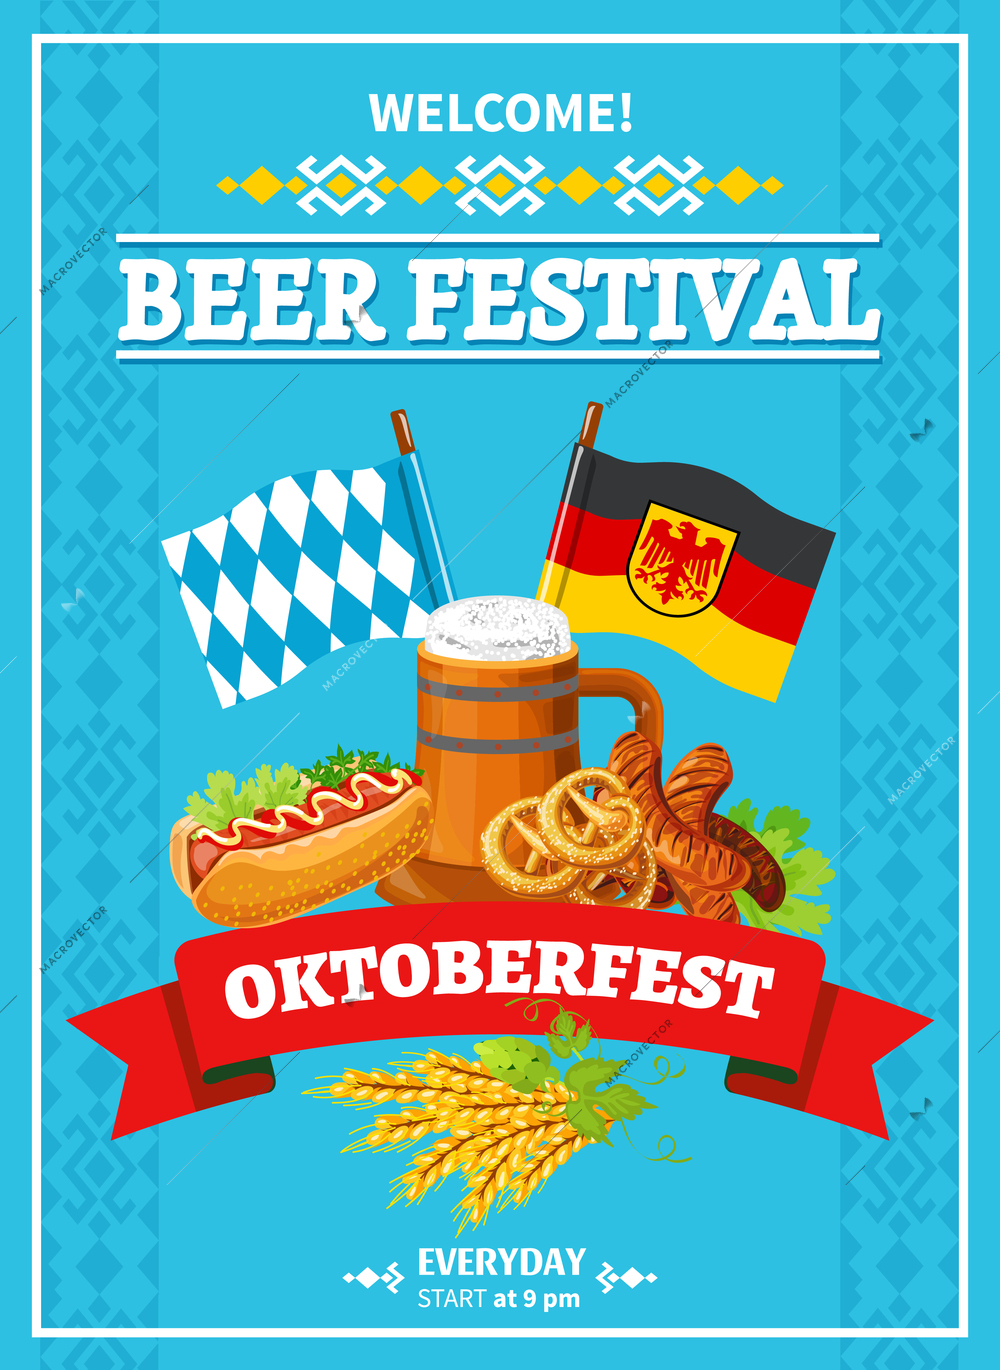 German annual oktoberfest beer festival invitation flat poster with flags beer and snacks abstract vector illustration